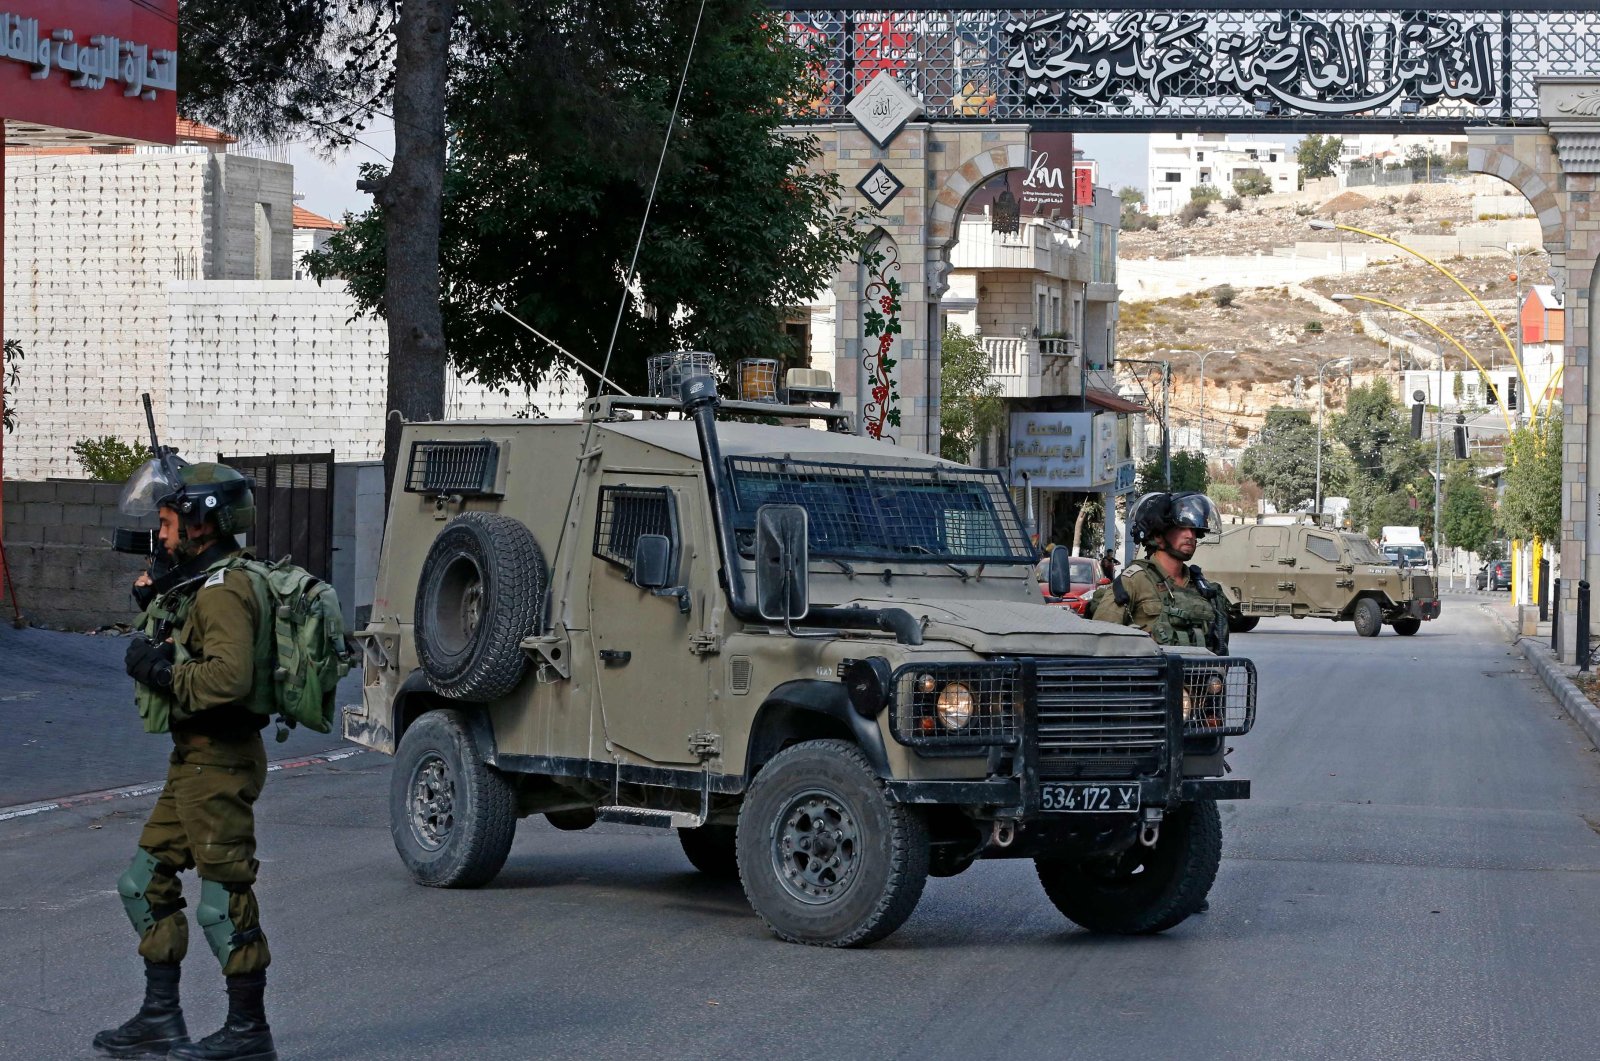 Israeli soldiers block a street following a demonstration calling for the release of Palestinian prisoners on hunger strike in Israeli jails, in the West Bank city of Hebron, occupied Palestine, Oct. 24, 2021. (AFP Photo)